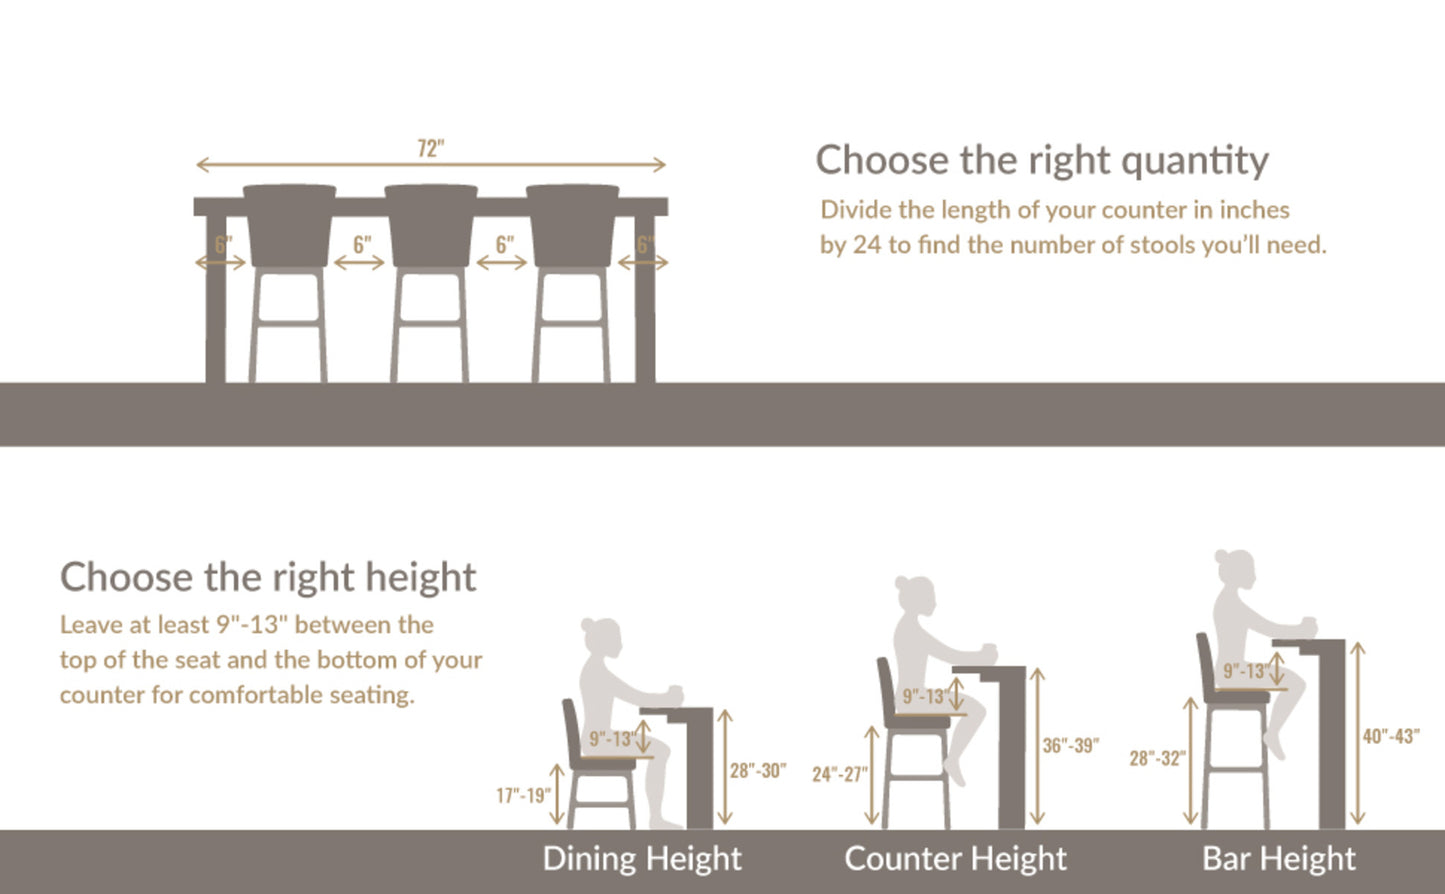 Optimize your space with the perfect stool quantity and height! Ensure 6" spacing and maintain 9"-13" between seat and counter for comfort. Choose from dining (17"-19"), counter (24"-27"), or bar height (28"-32") stools for the ideal fit.